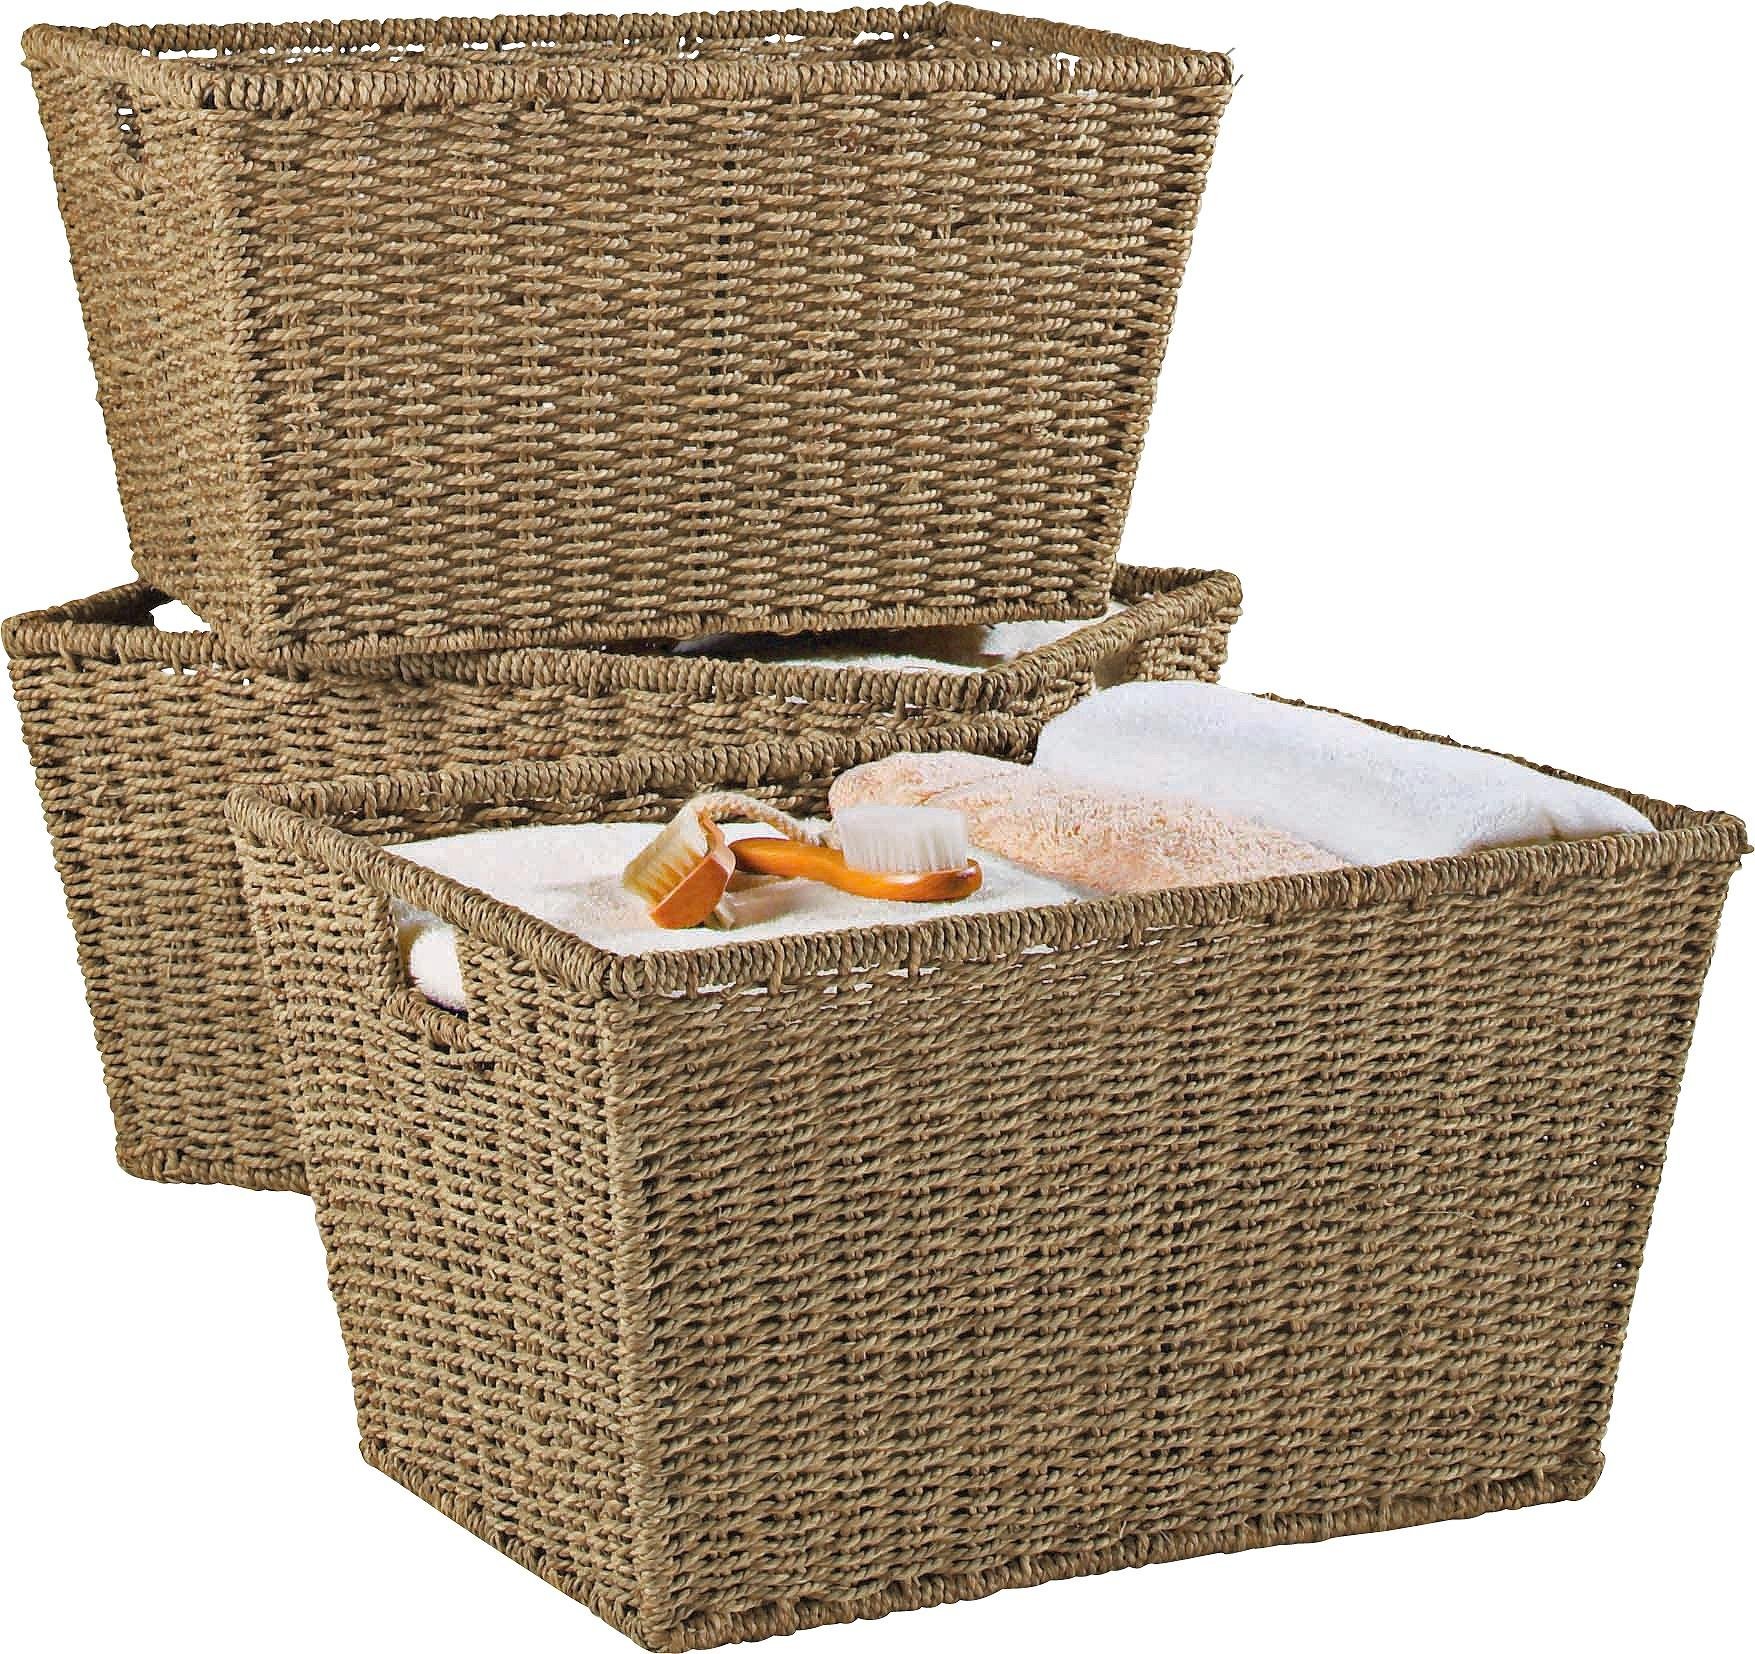 Argos Home Set of 3 Large Seagrass Storage Baskets - Natural